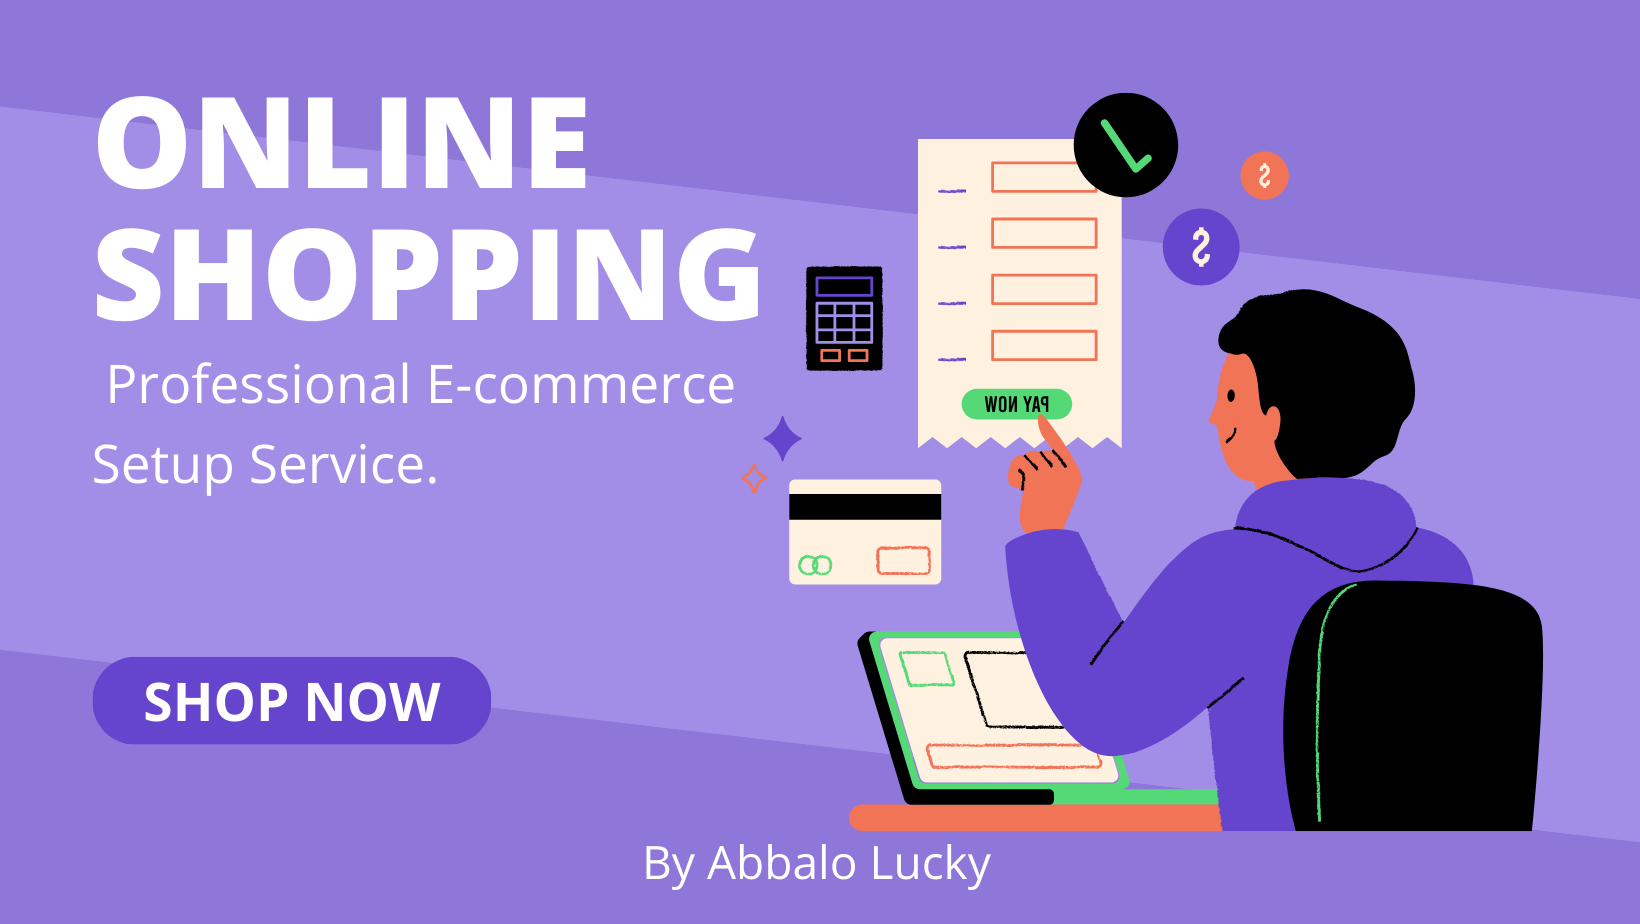 Start Your Online Store: Professional E-commerce Setup Service! | Online Shopping Company